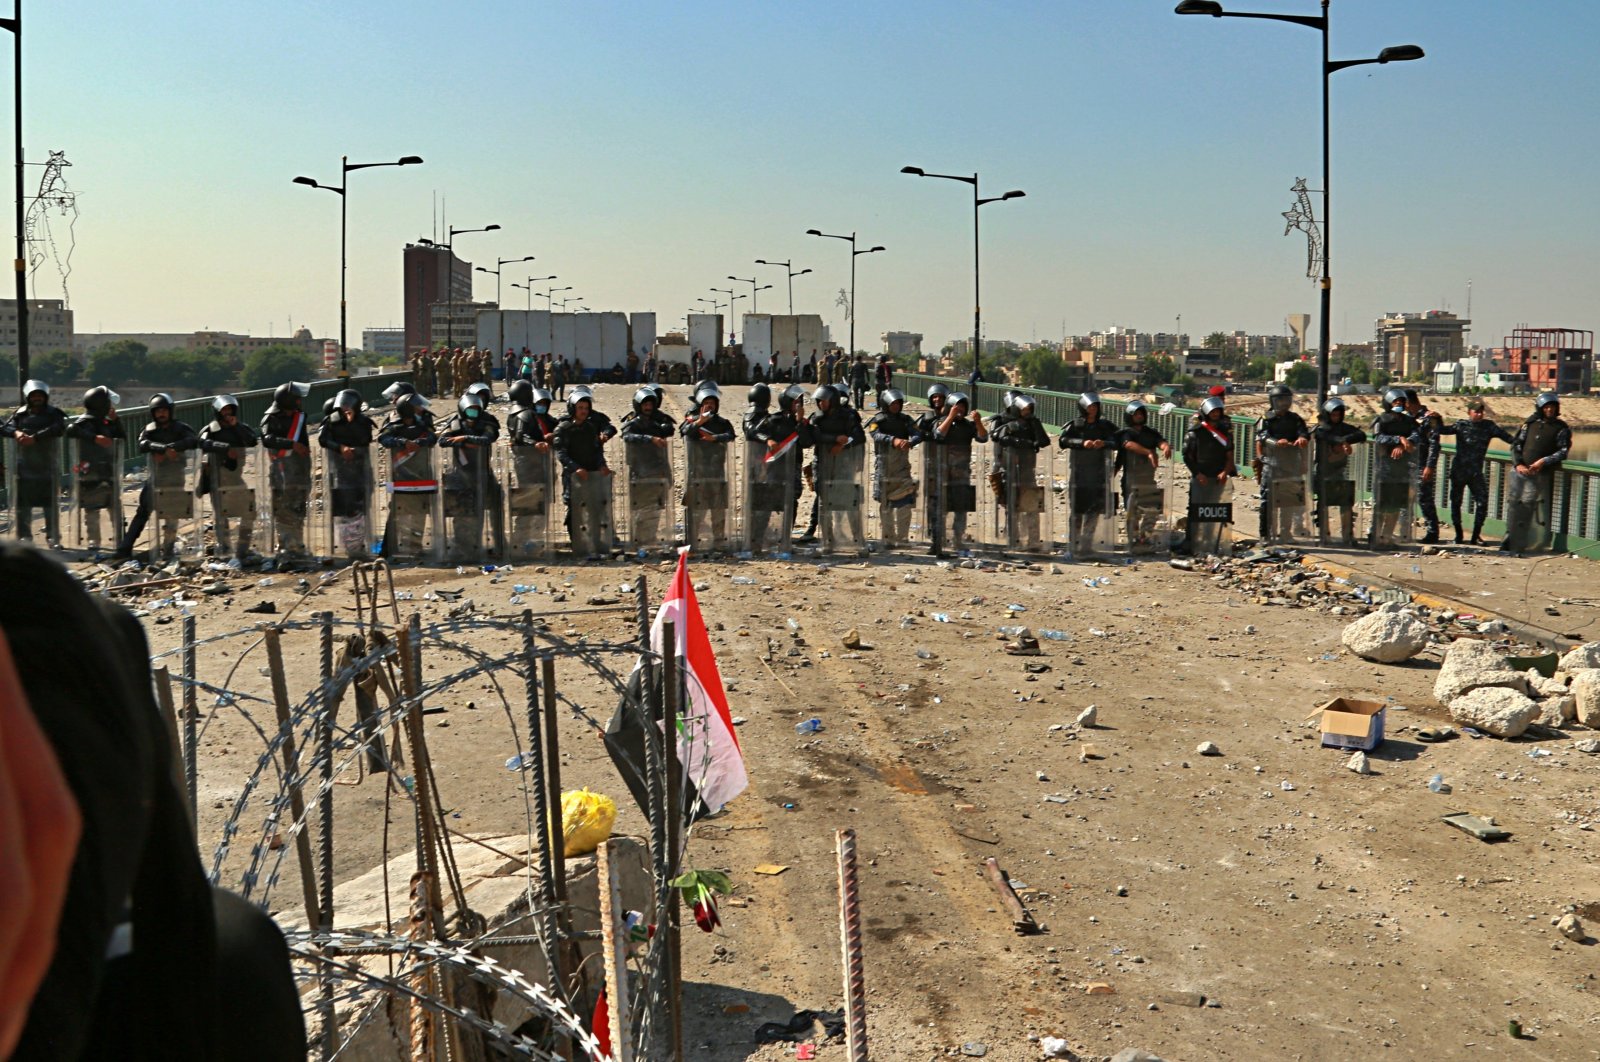 Security forces close the bridge leading to the Green Zone during a demonstration, Baghdad, Oct. 26, 2019. (AP Photo)